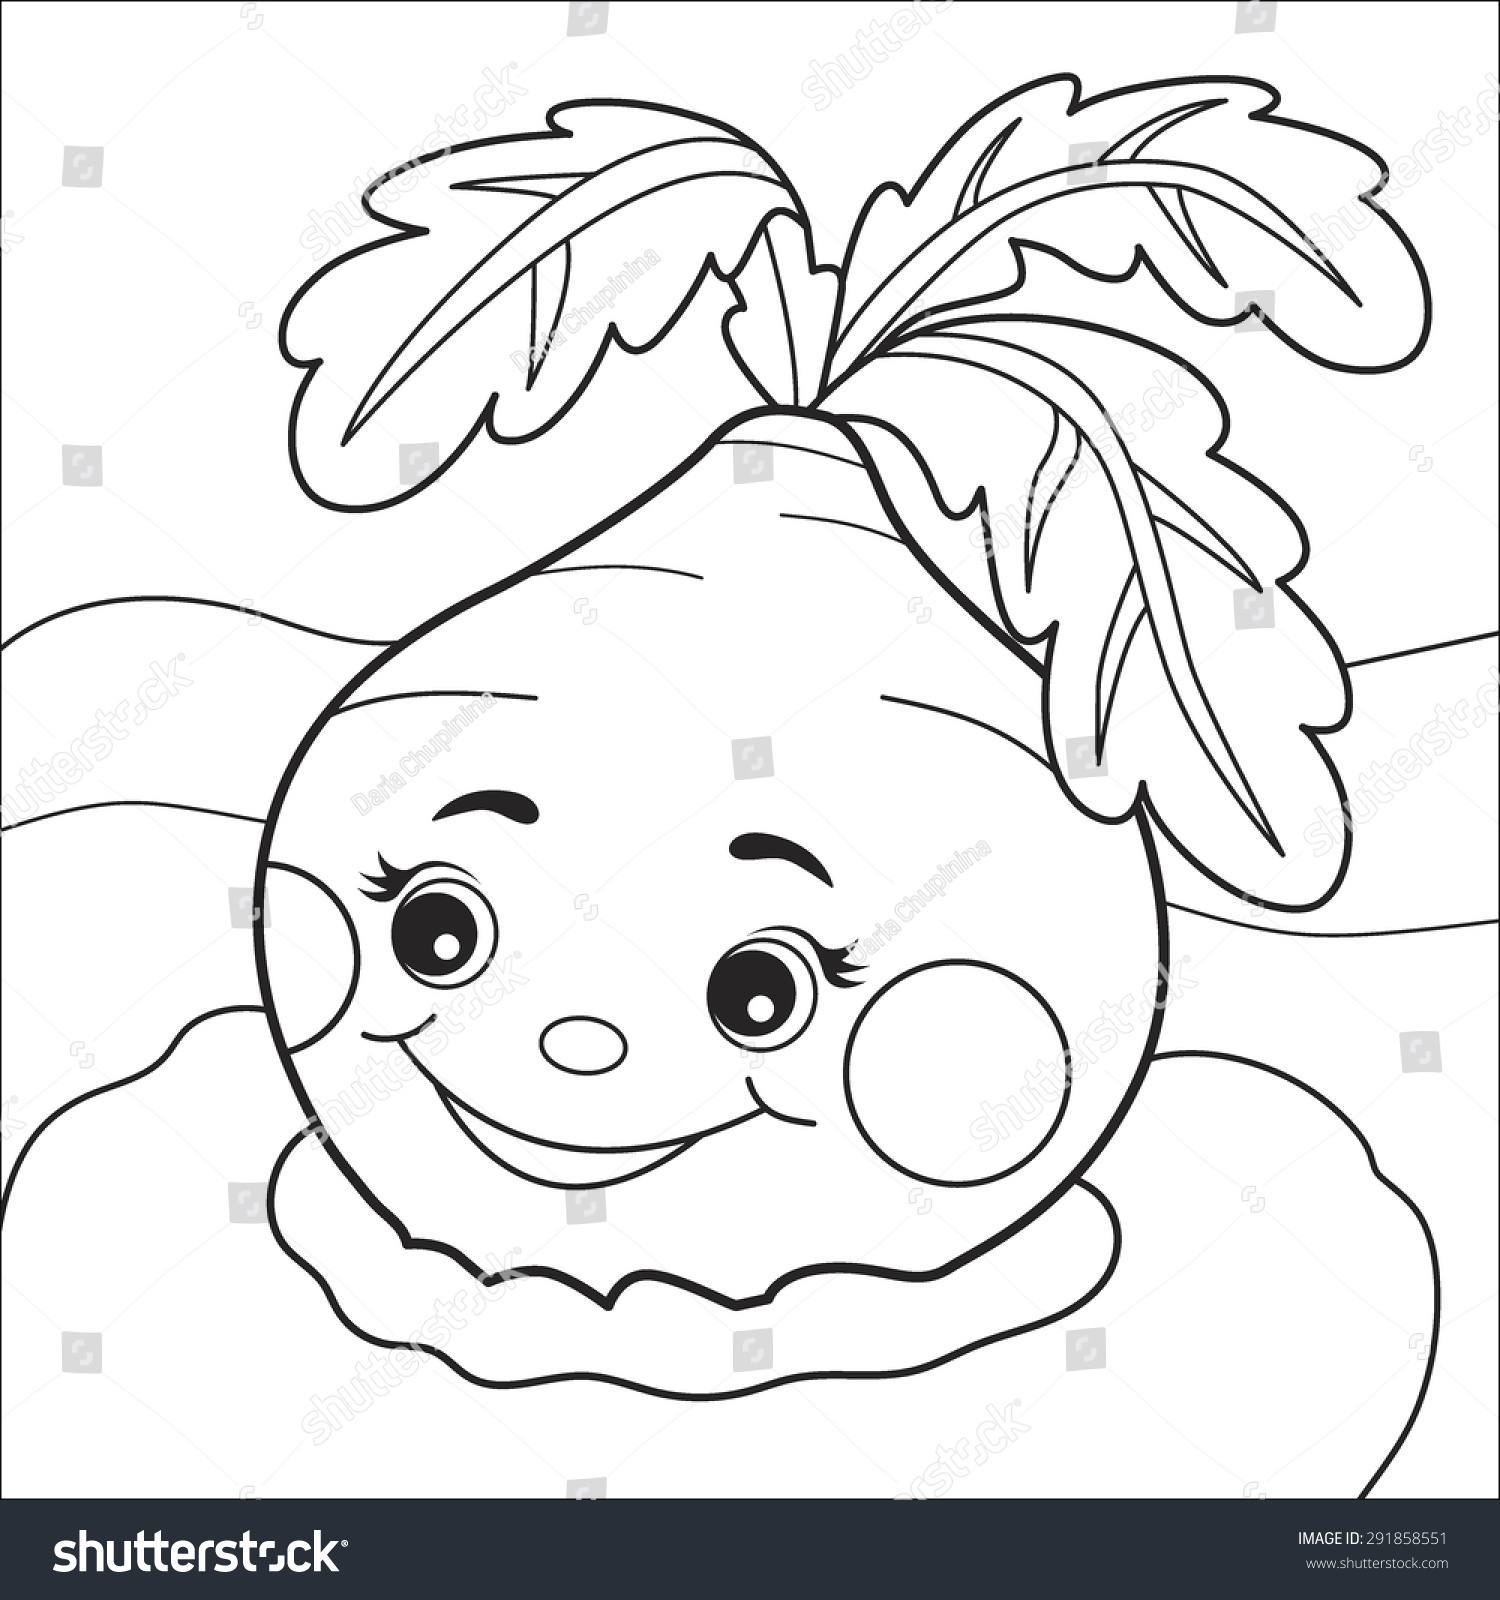 Funny Cartoon Vegetable Coloring Page Funny Stock Vector Royalty ...